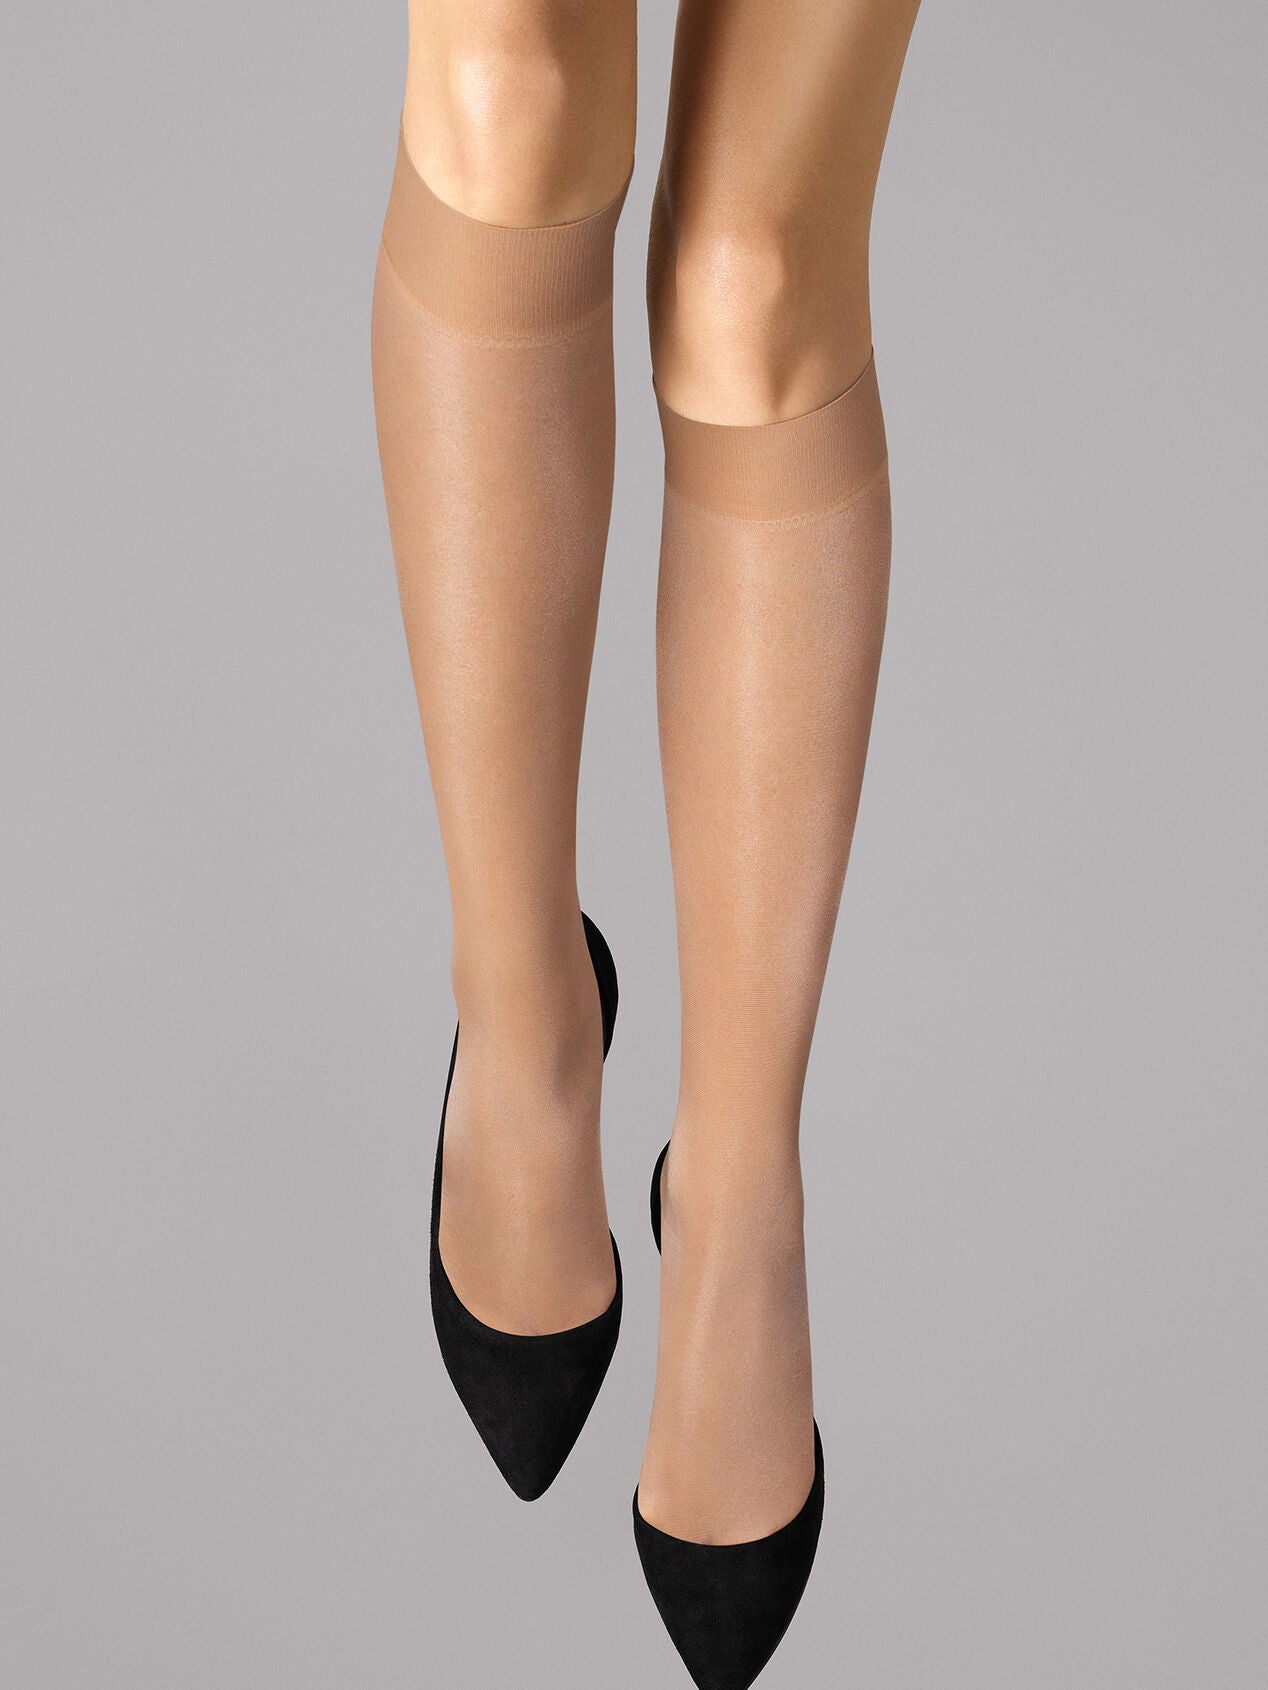 Wolford Satin Touch 20 kniekous